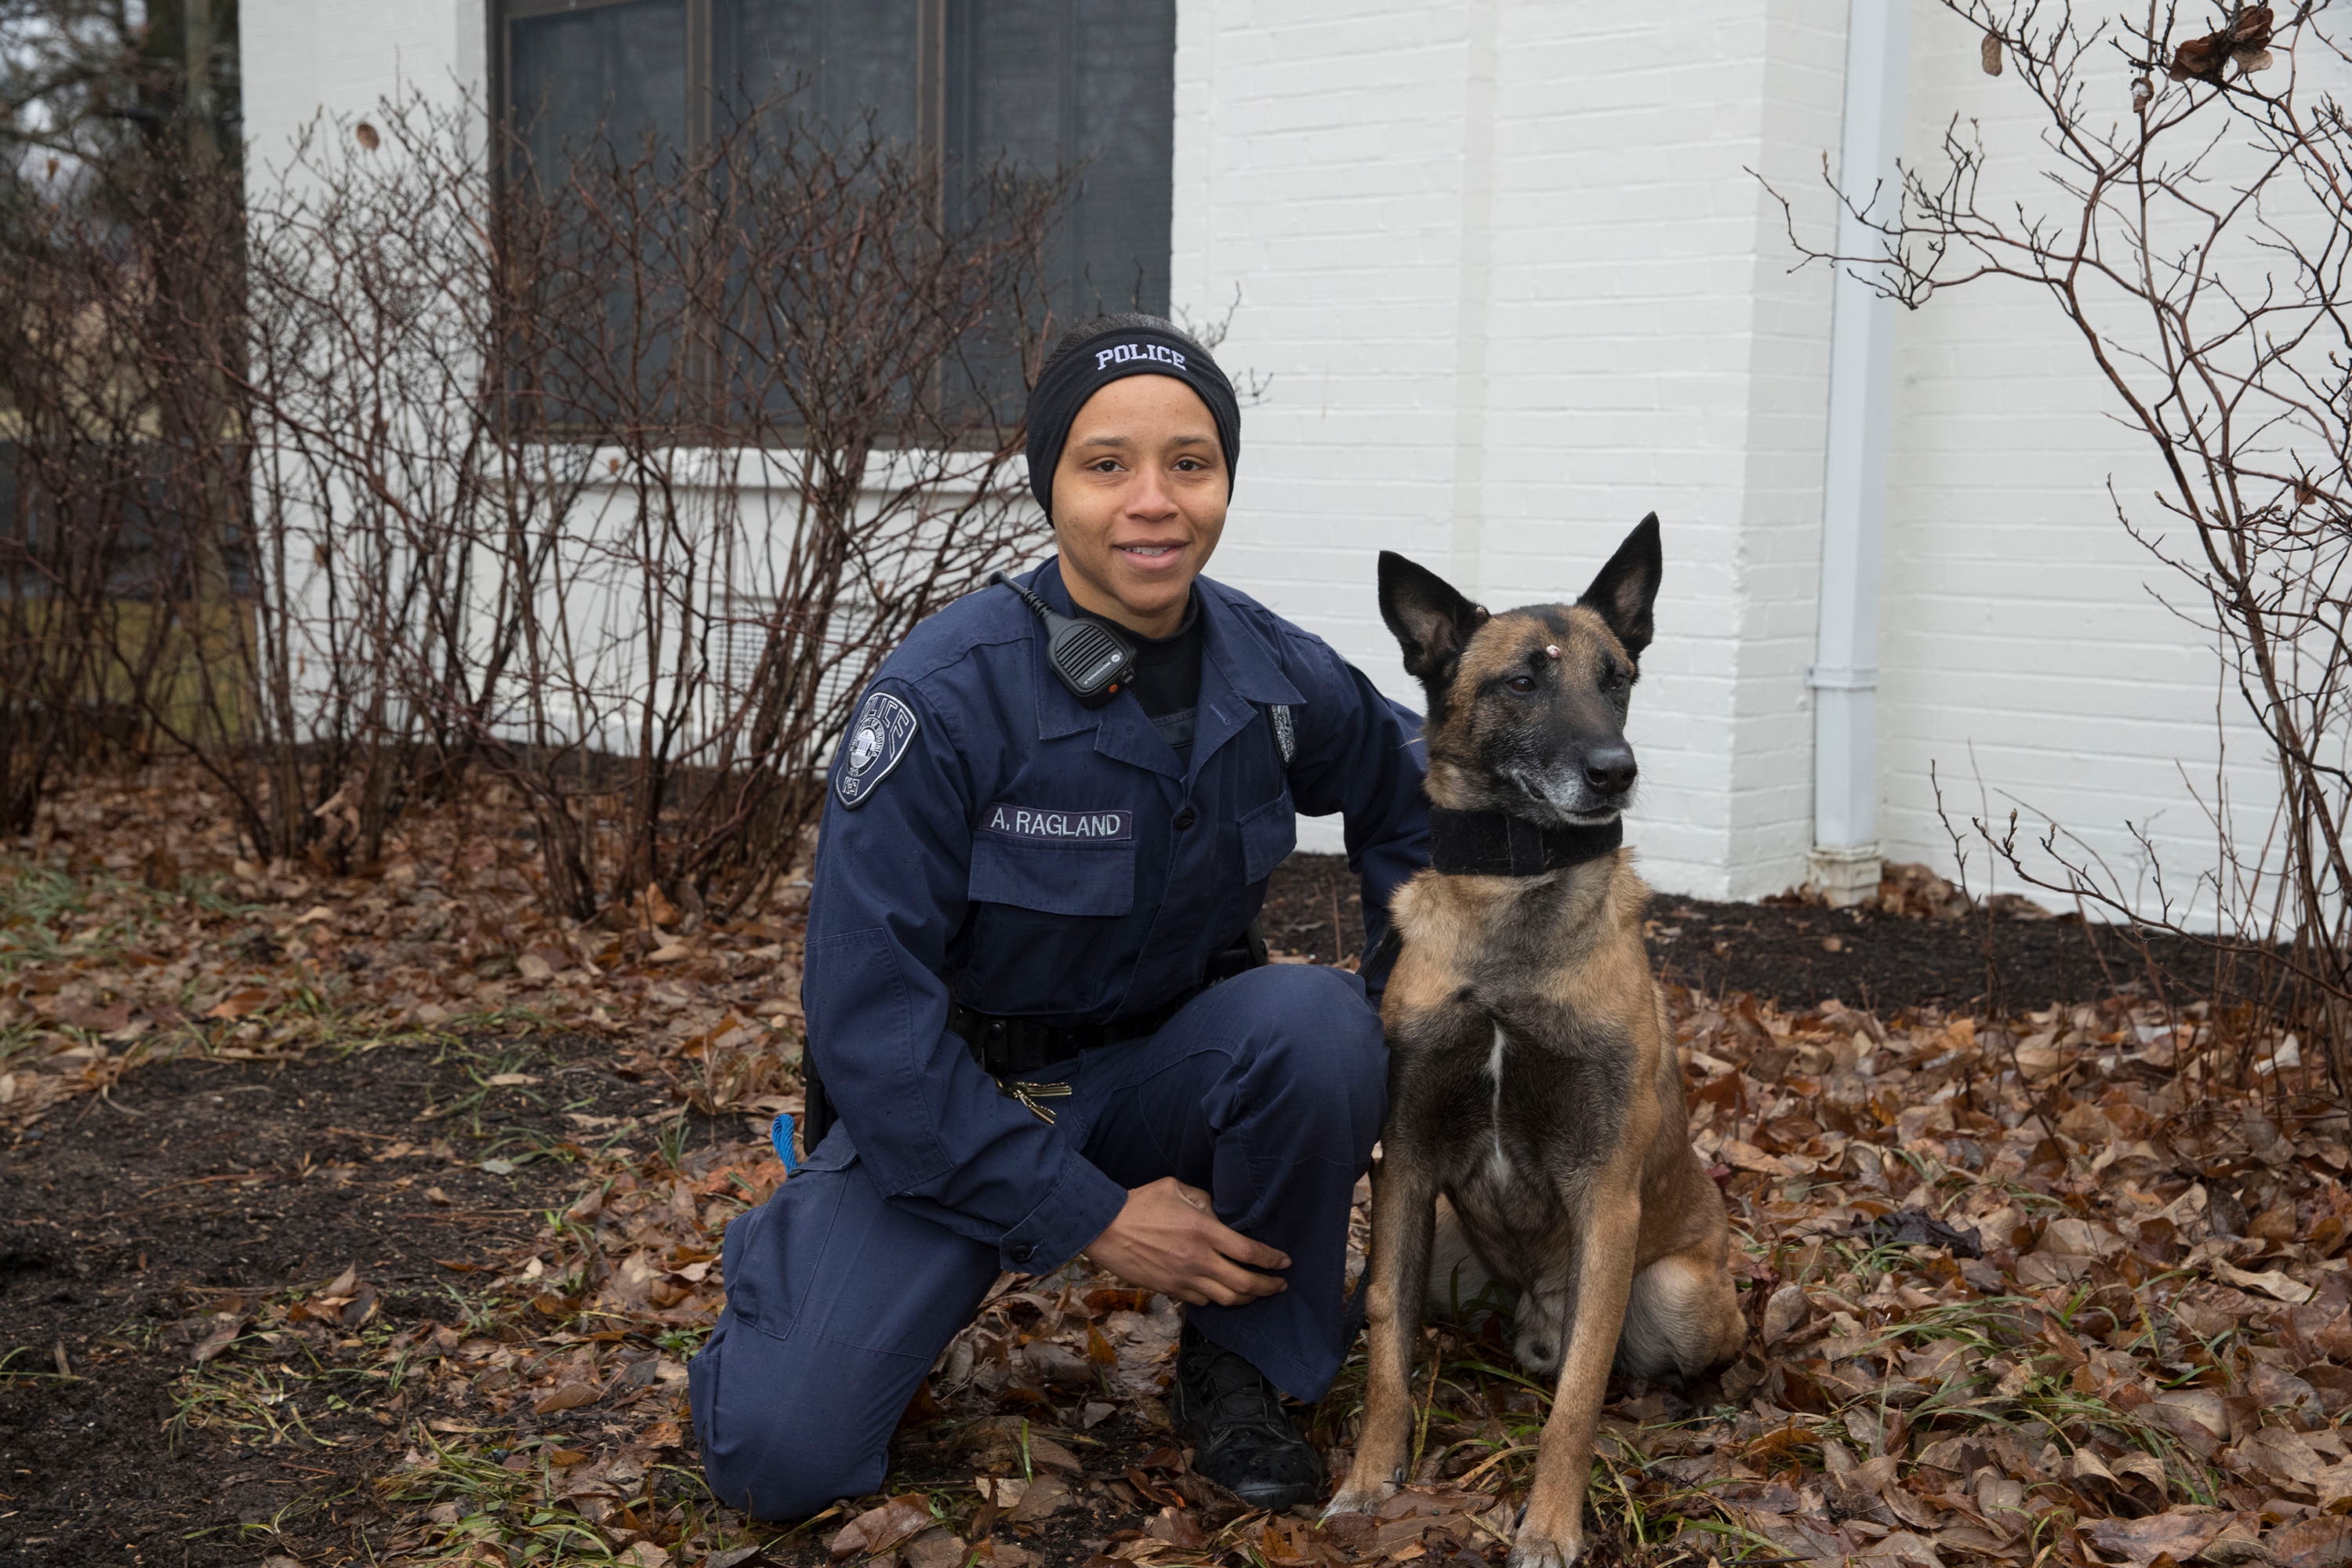 Officer Audrell Ragland and Muki sit in leaves together on Grounds